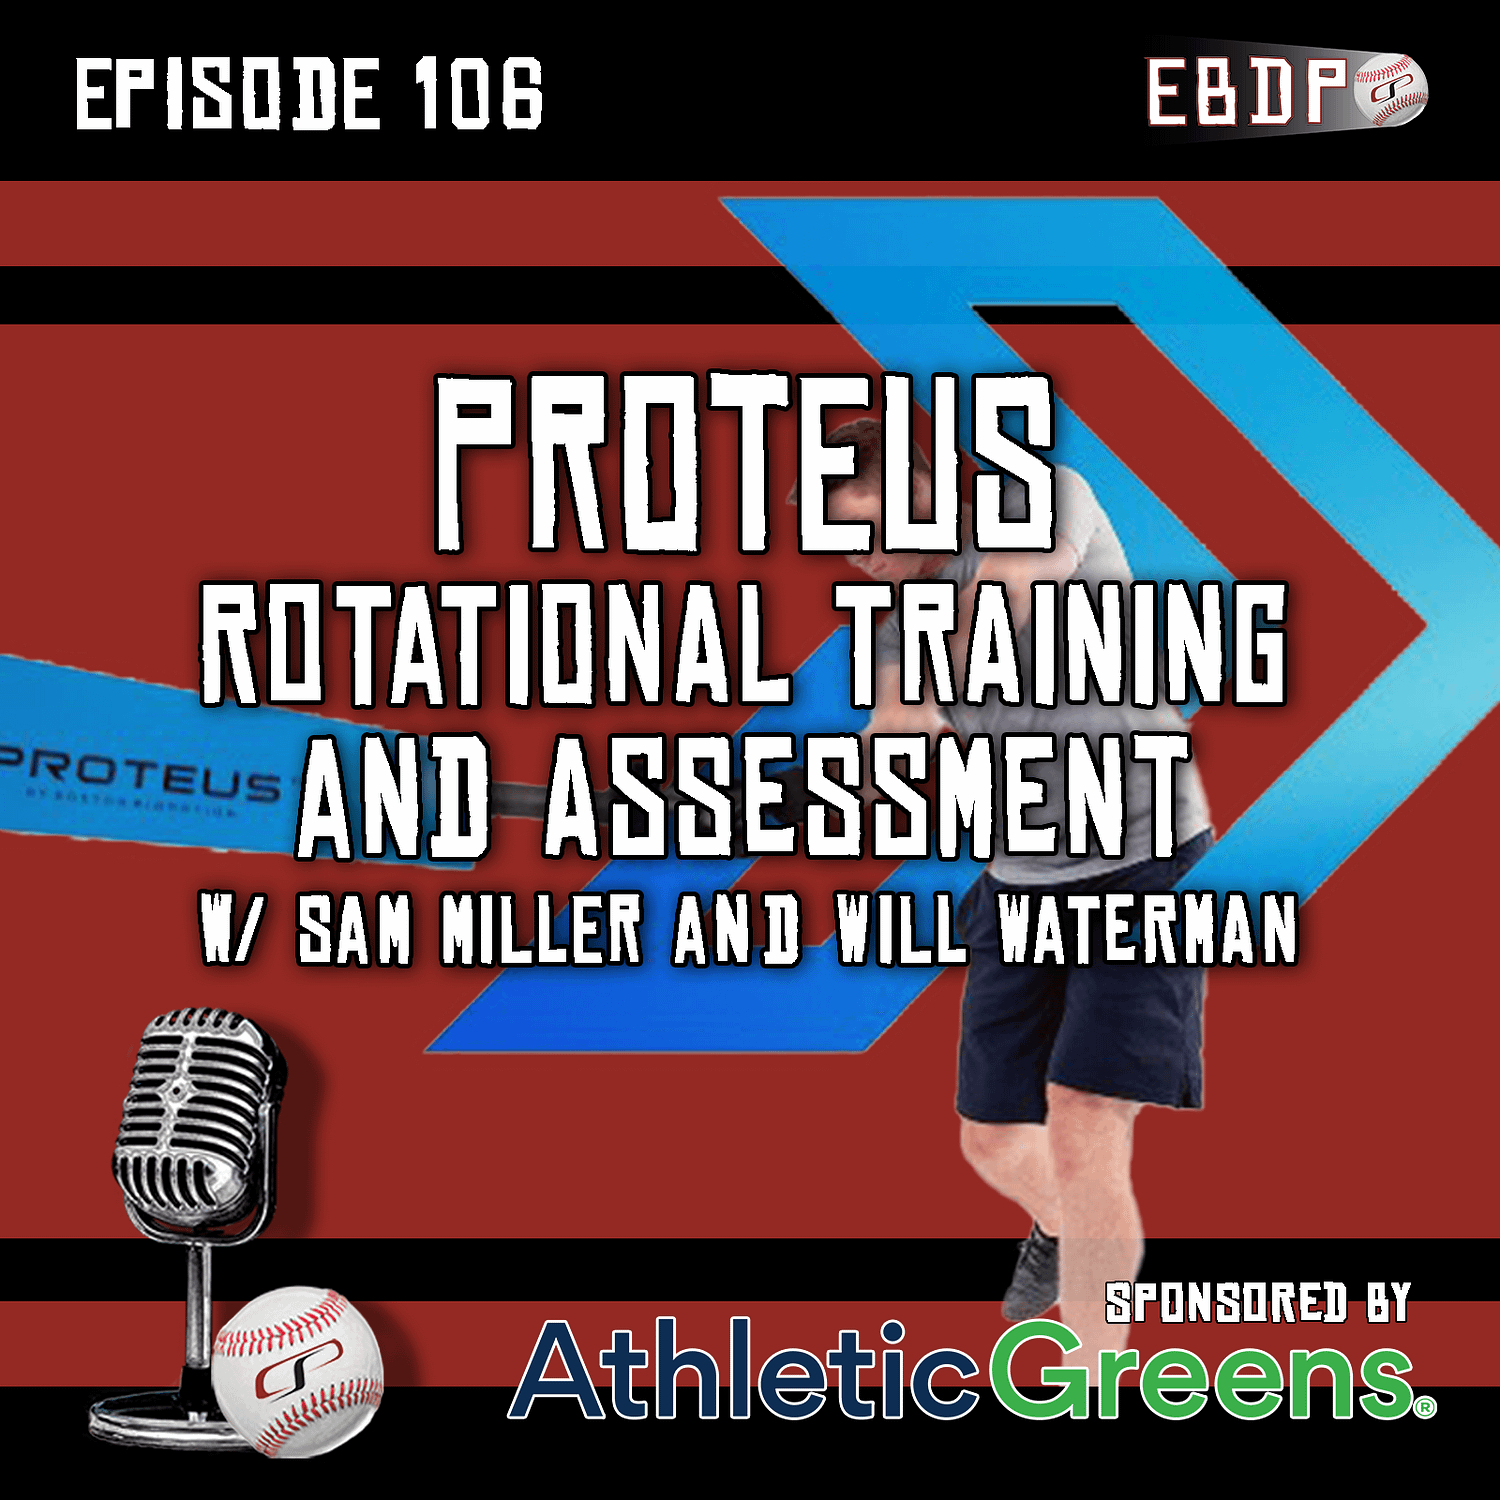 Proteus Rotational Training and Assessment